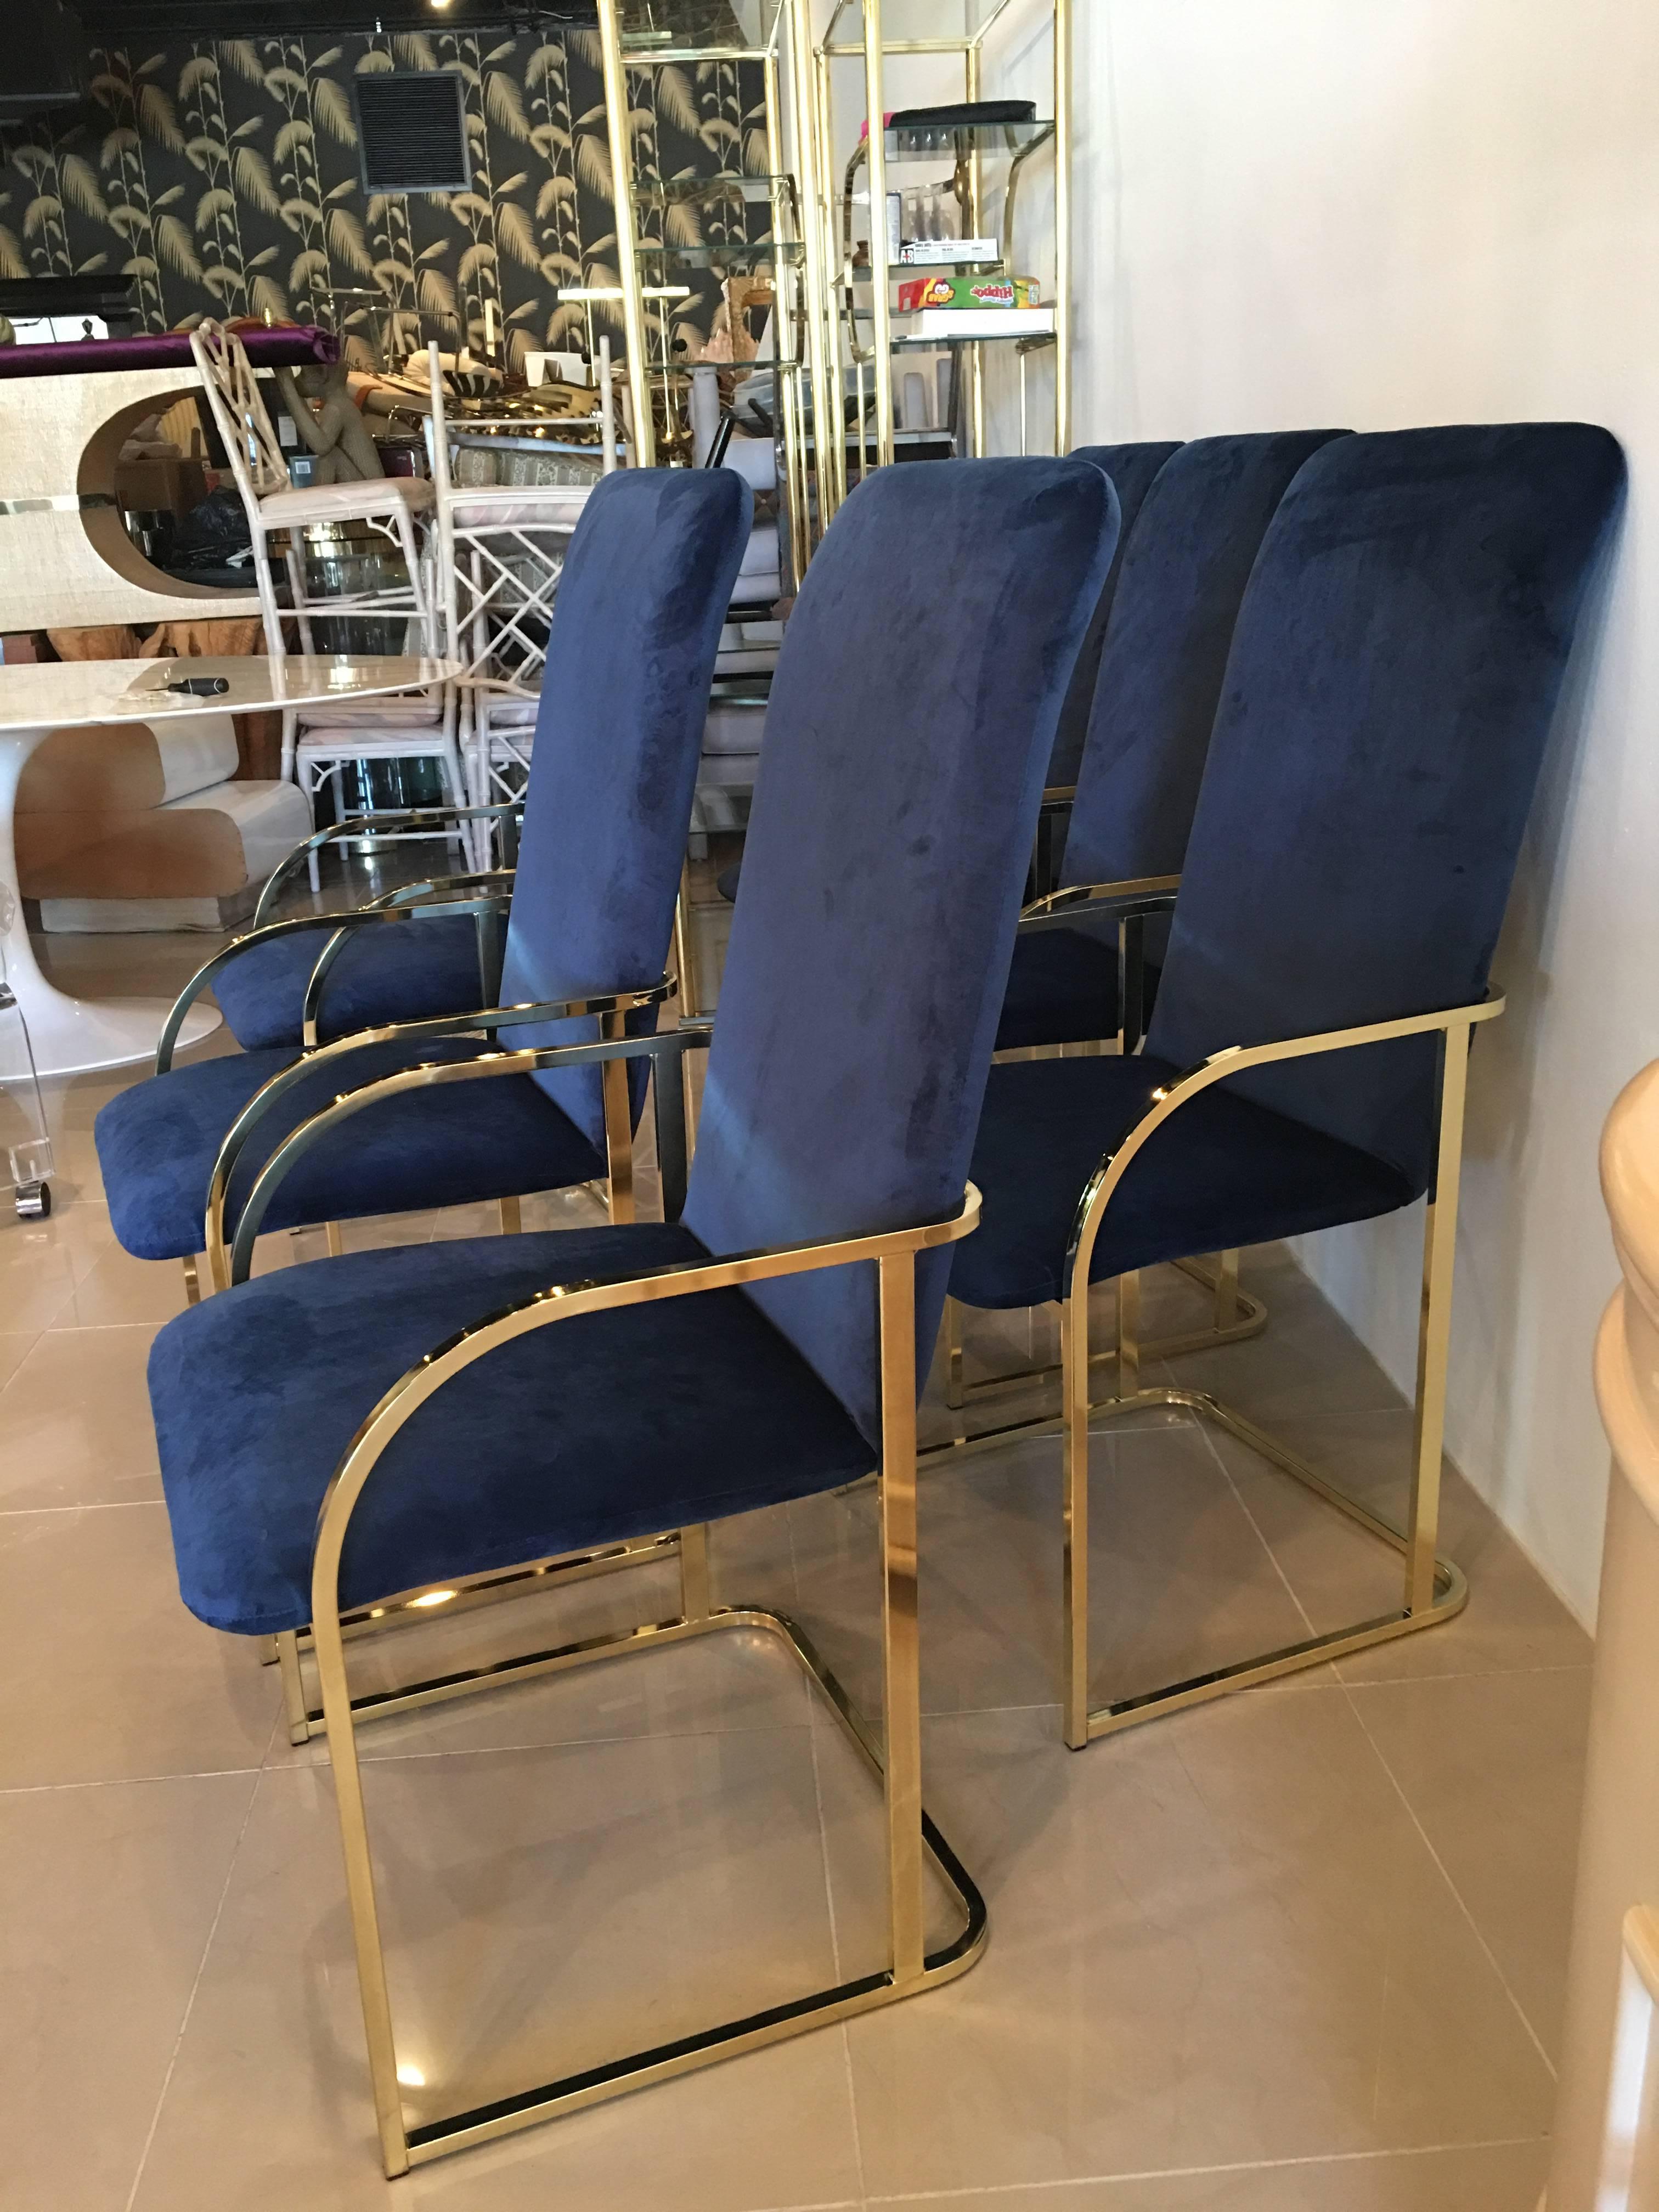 Amazing set of 12 twelve vintage dining arm chairs armchairs. Tagged DIA Design Institute of America. Newly upholstered in a blue indigo navy velvet. Brass is in overall great condition with a few patina marks here and there, above average. 